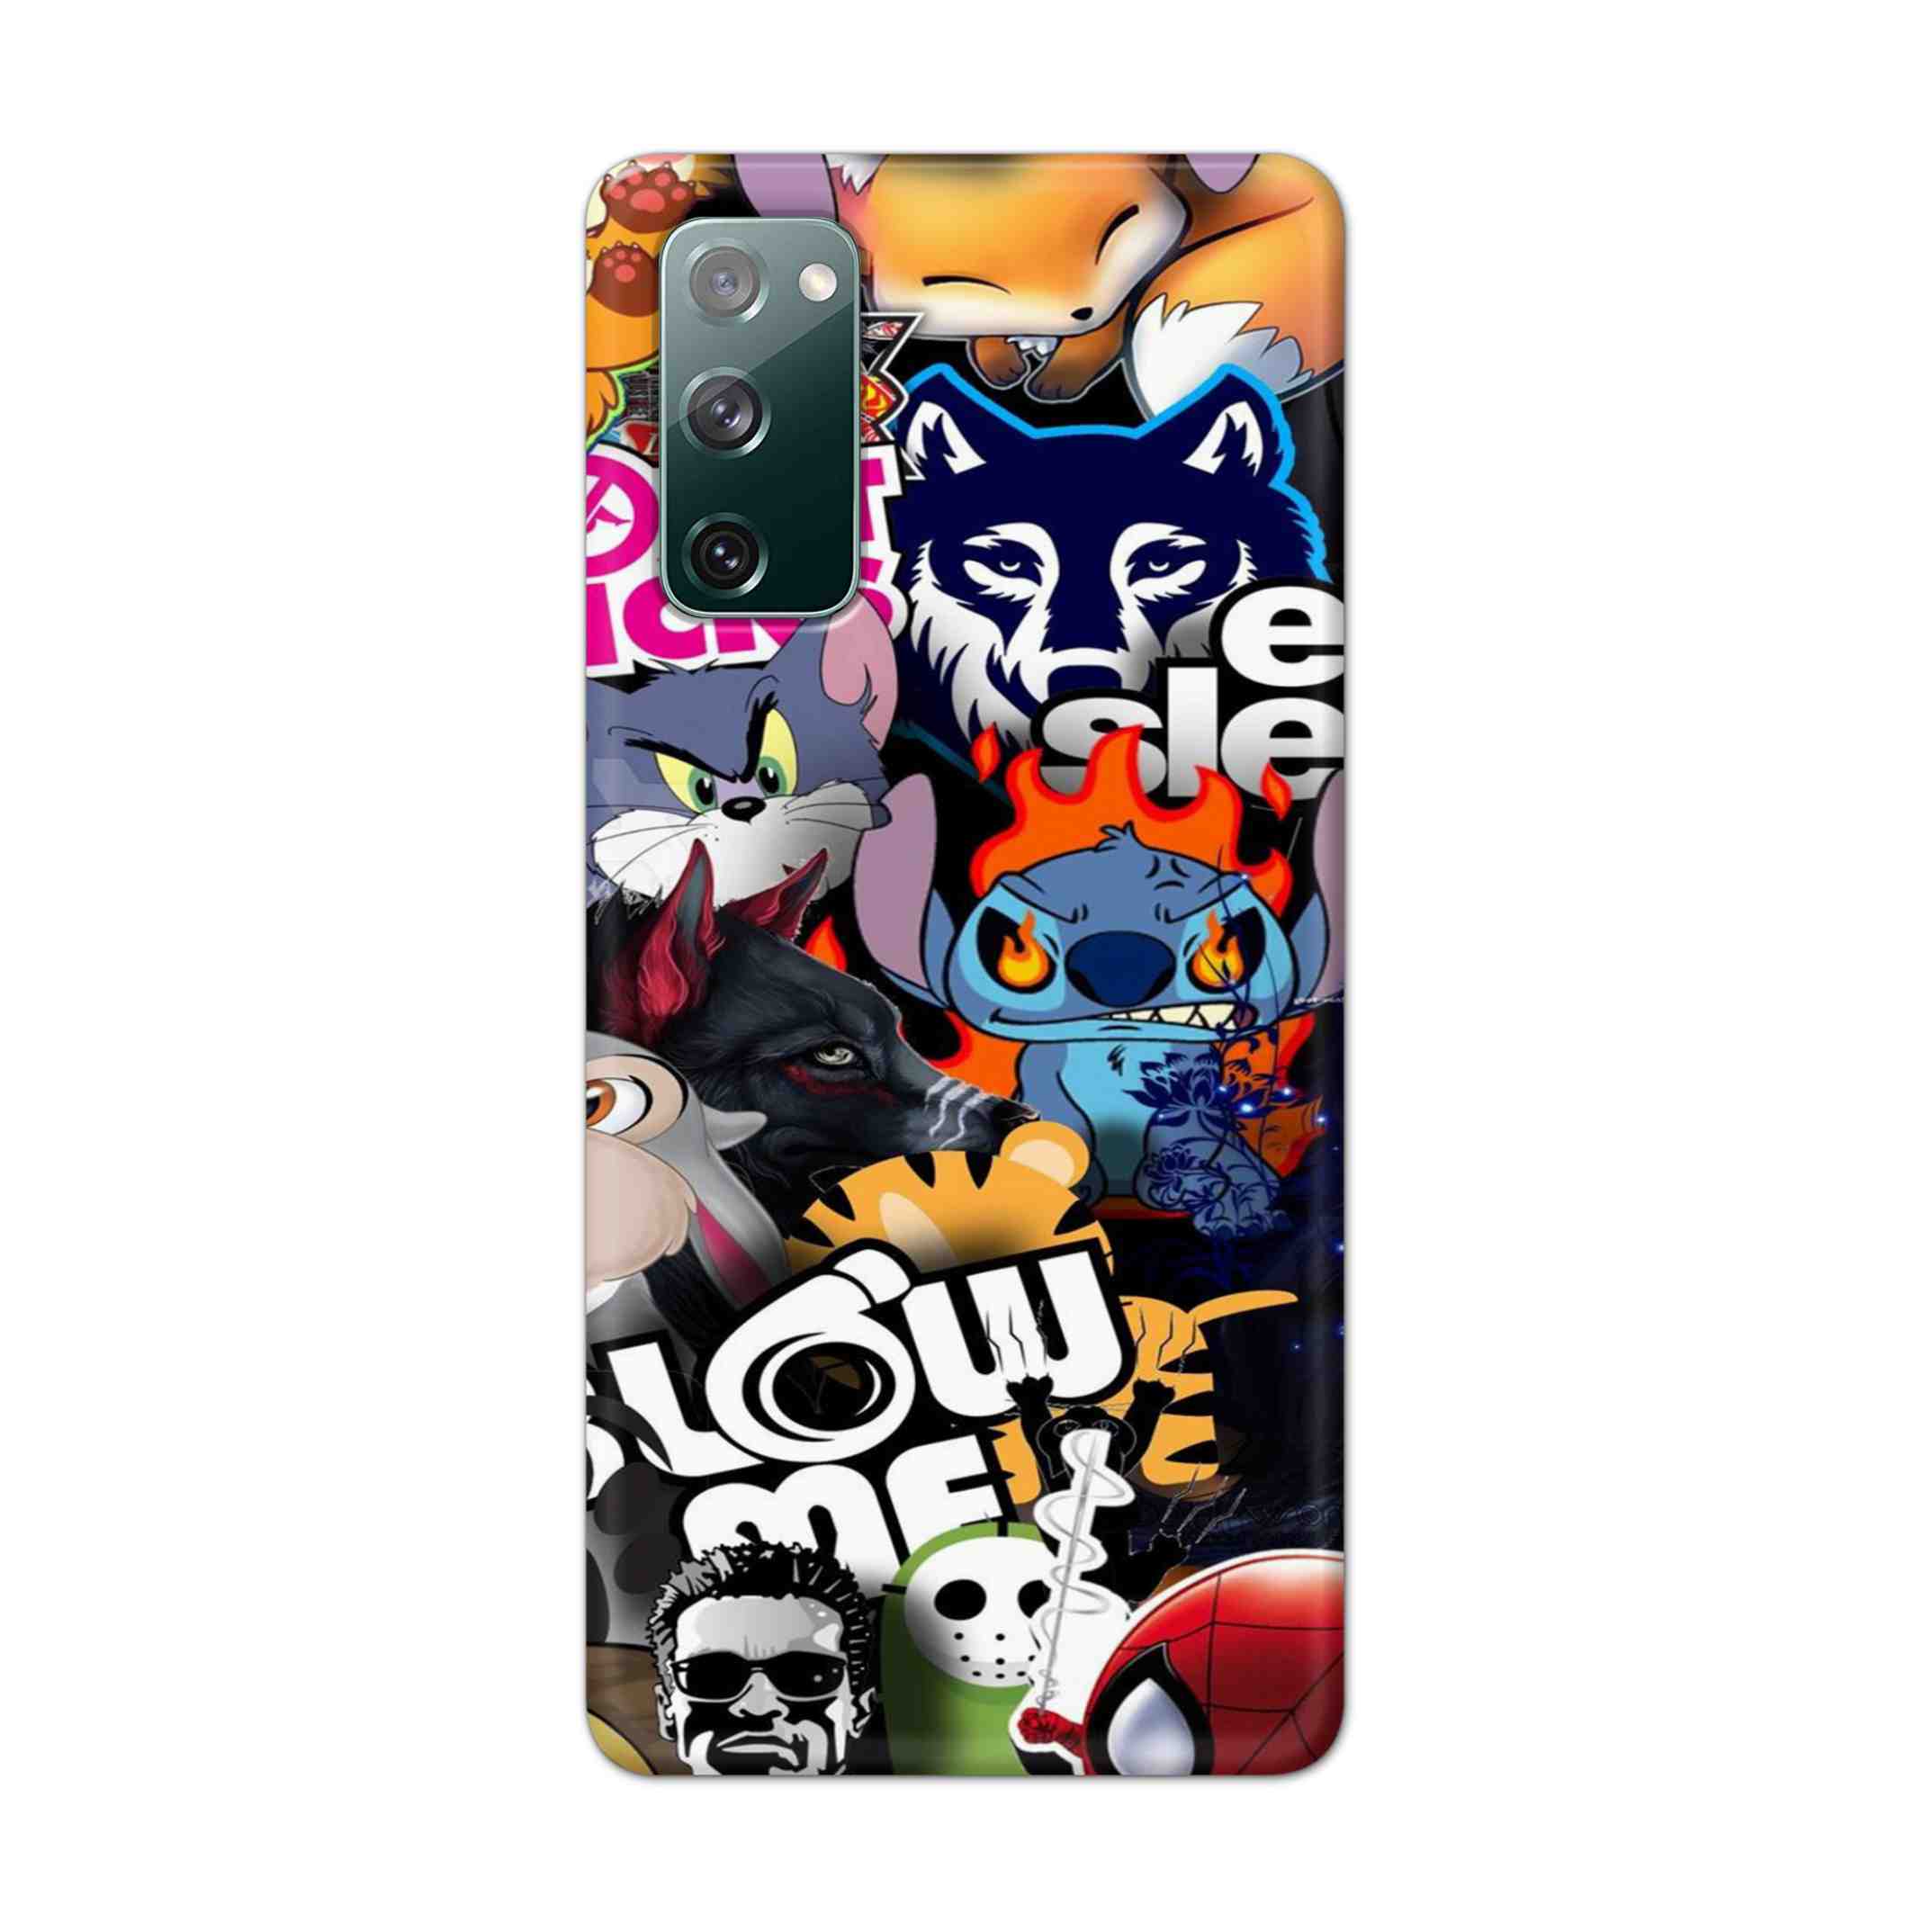 Buy Blow Me Hard Back Mobile Phone Case Cover For Samsung Galaxy S20 FE Online